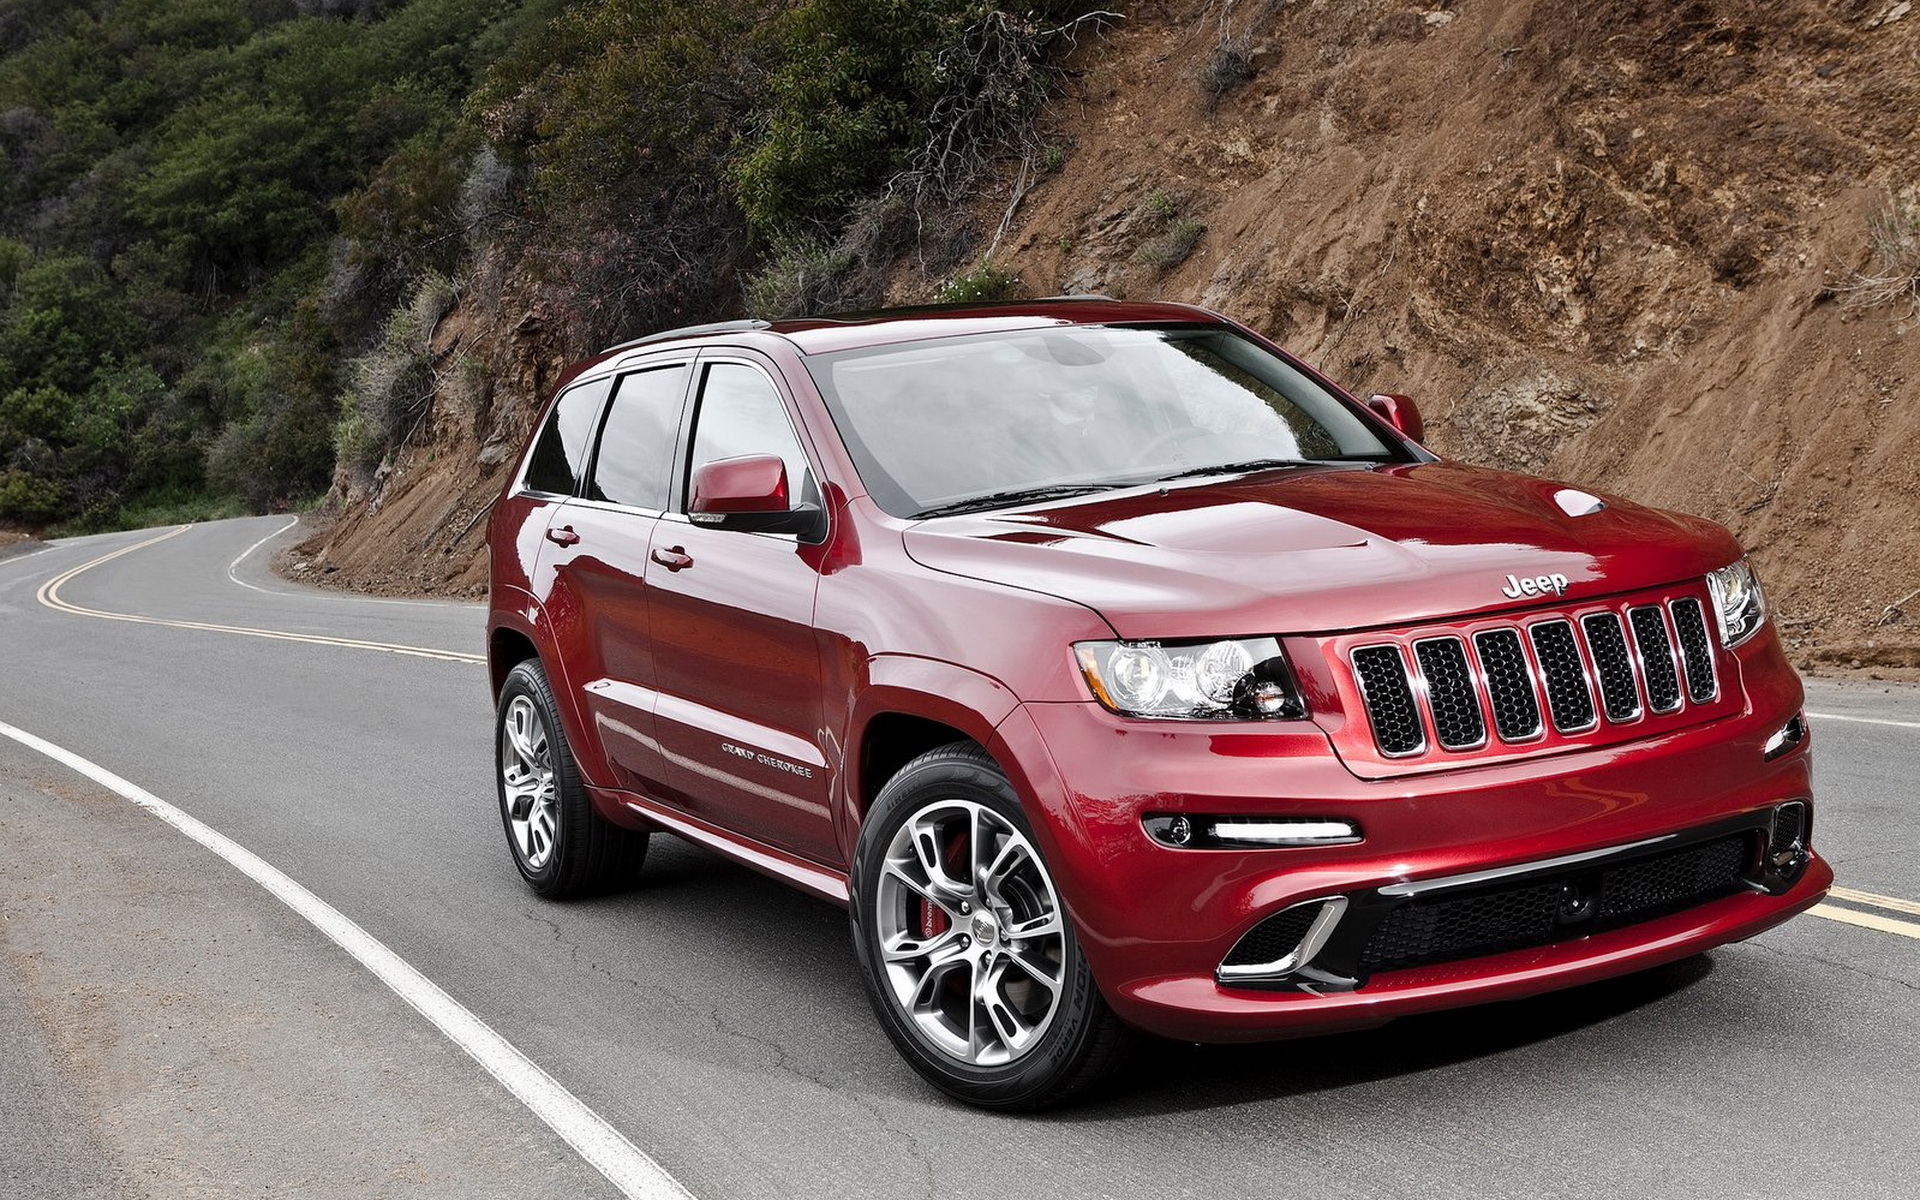 Jeep Grand Cherokee SRT8 wallpapers and images   wallpapers pictures